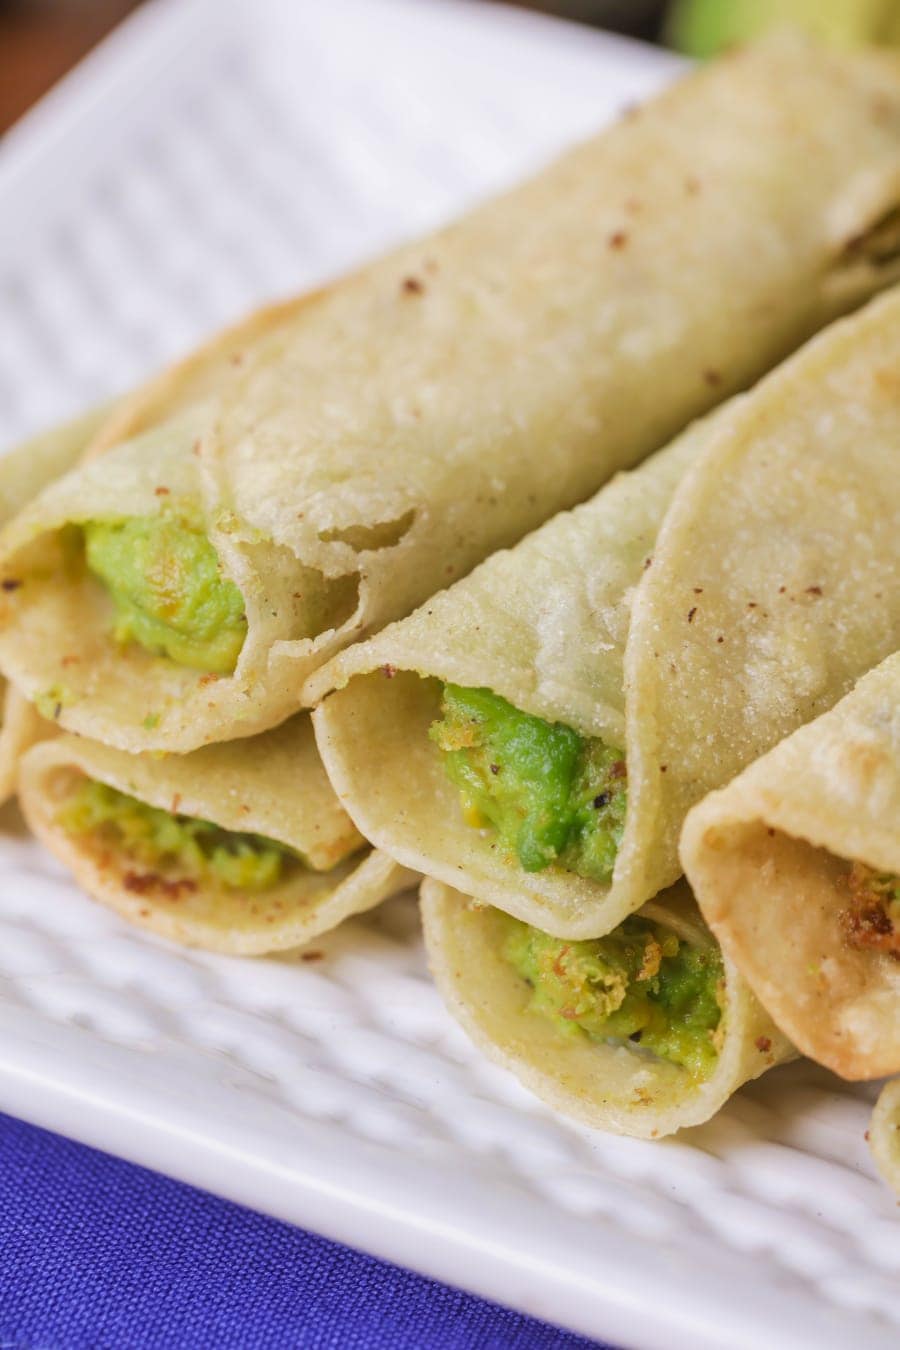 Avocado Taquitos Lil Luna,Signs Your Spouse Is Cheating On You